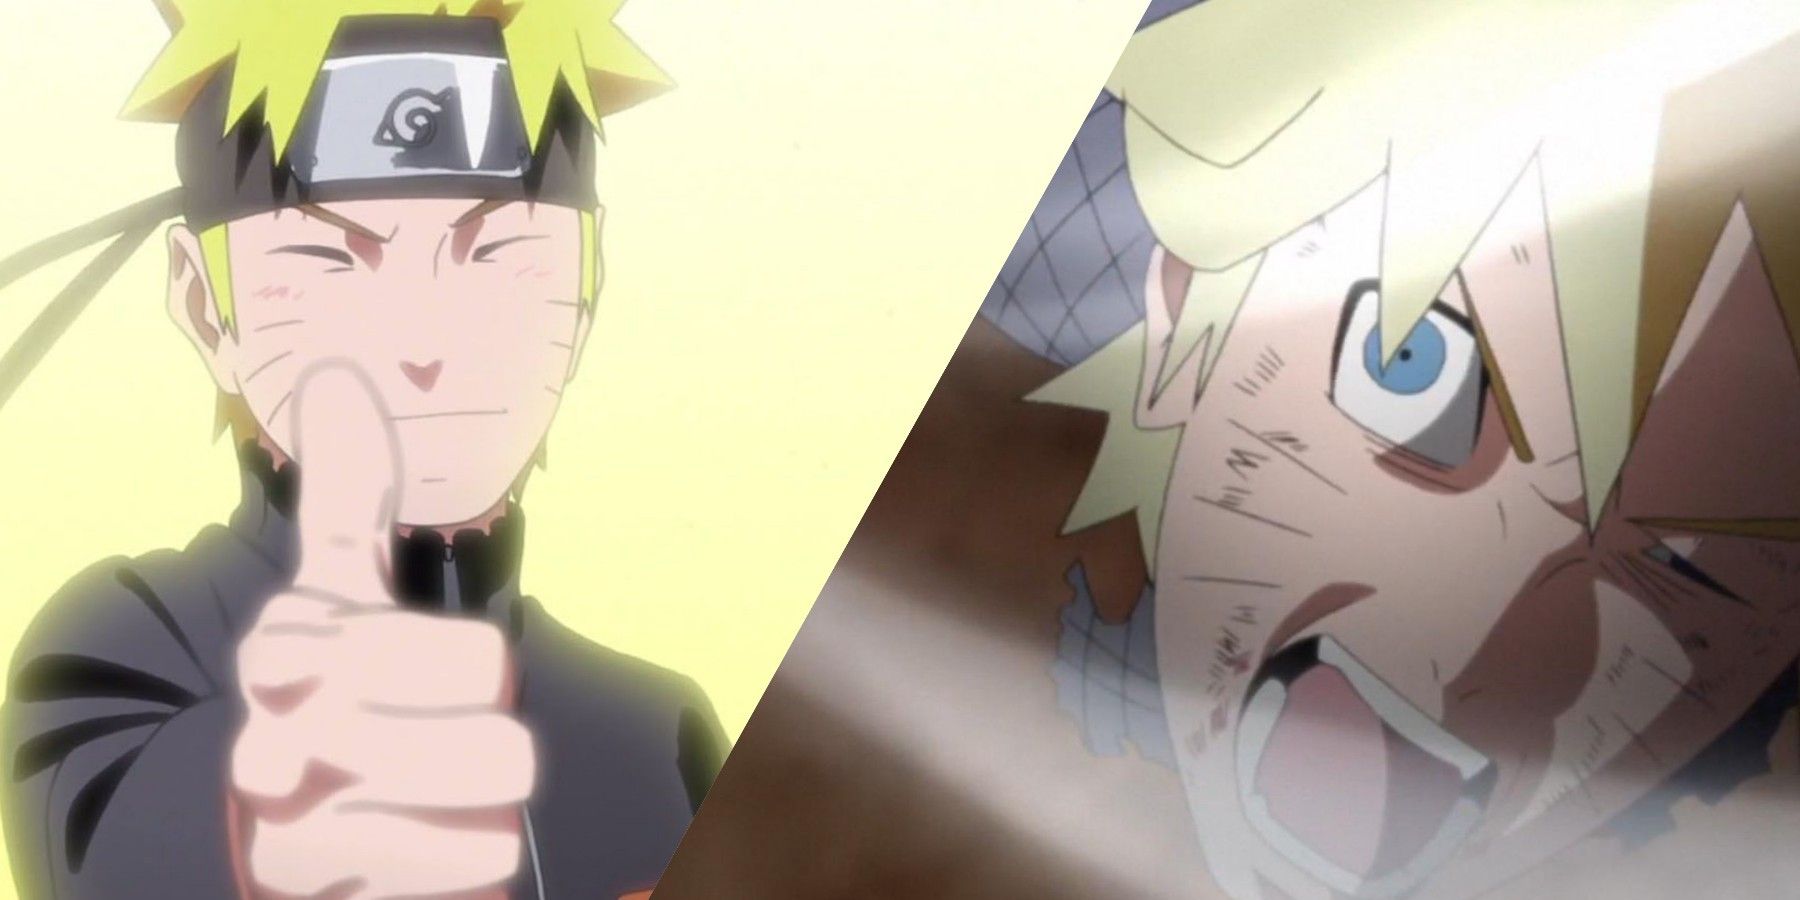 How to Get into Naruto: Everything You Need to Know About the Anime & Manga